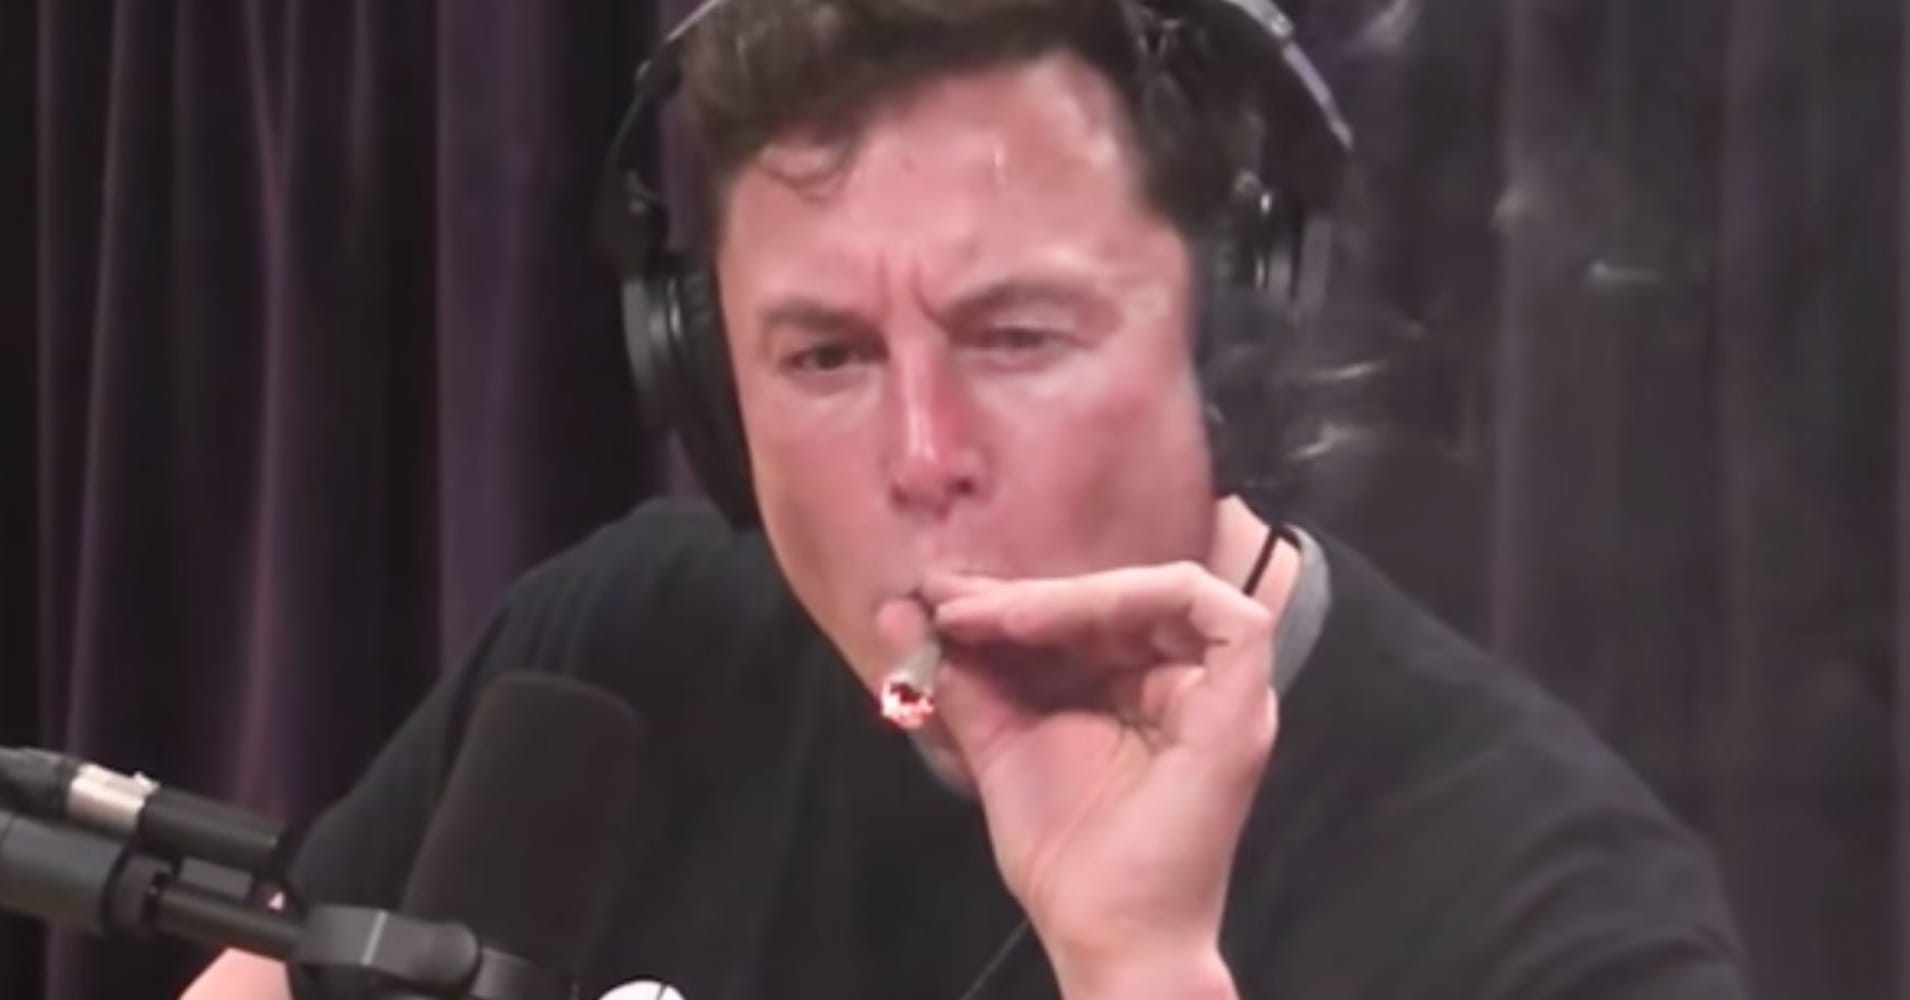 Elon Musk may have violated Tesla conduct policy by smoking weed1910 x 1000